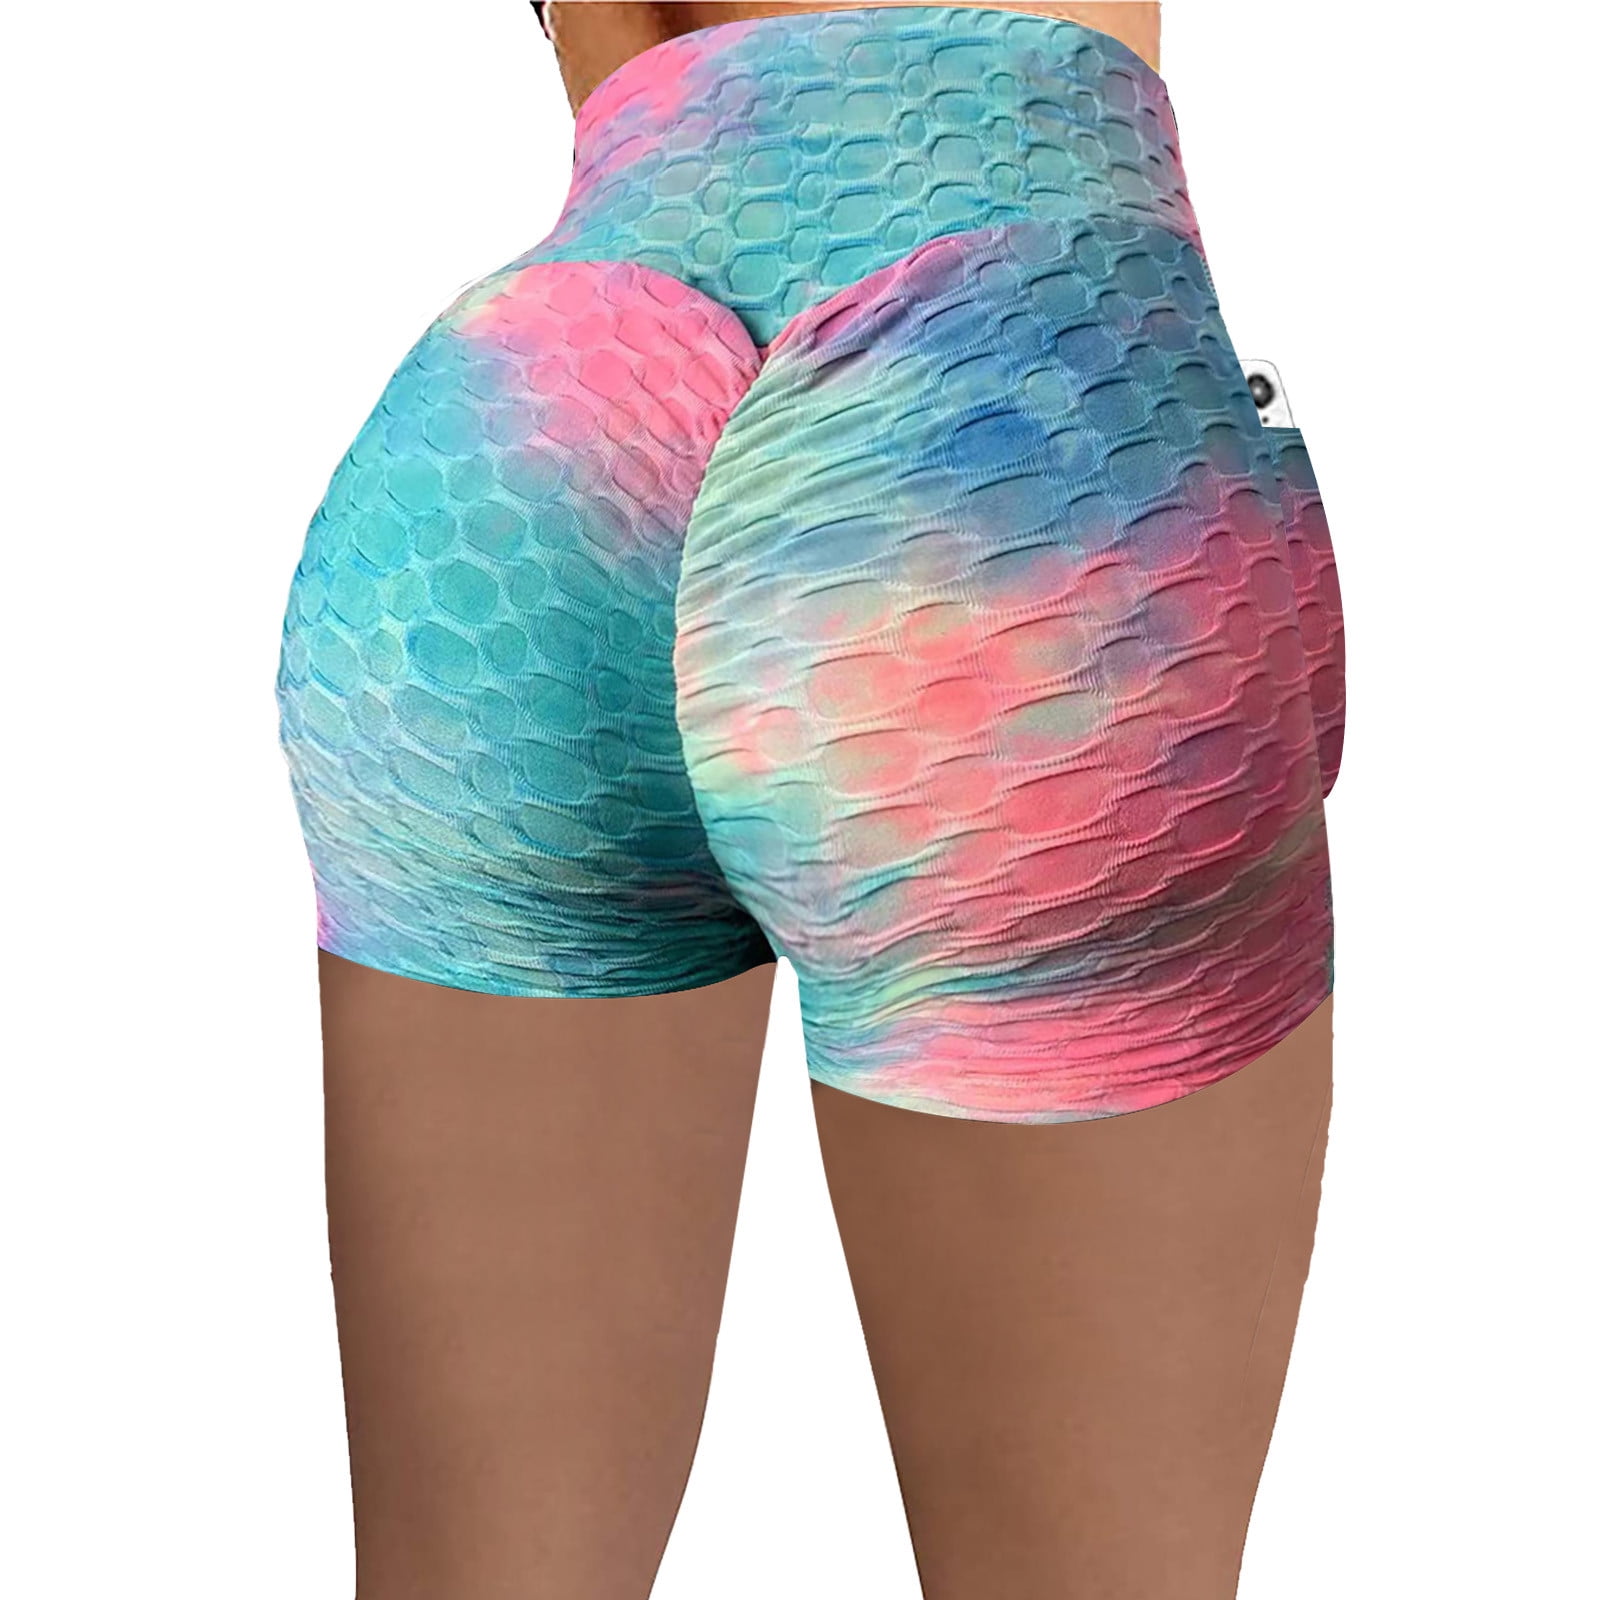 Hot Lace up Activewear Gym Boxing Yoga Shorts Butt Lift Fitness